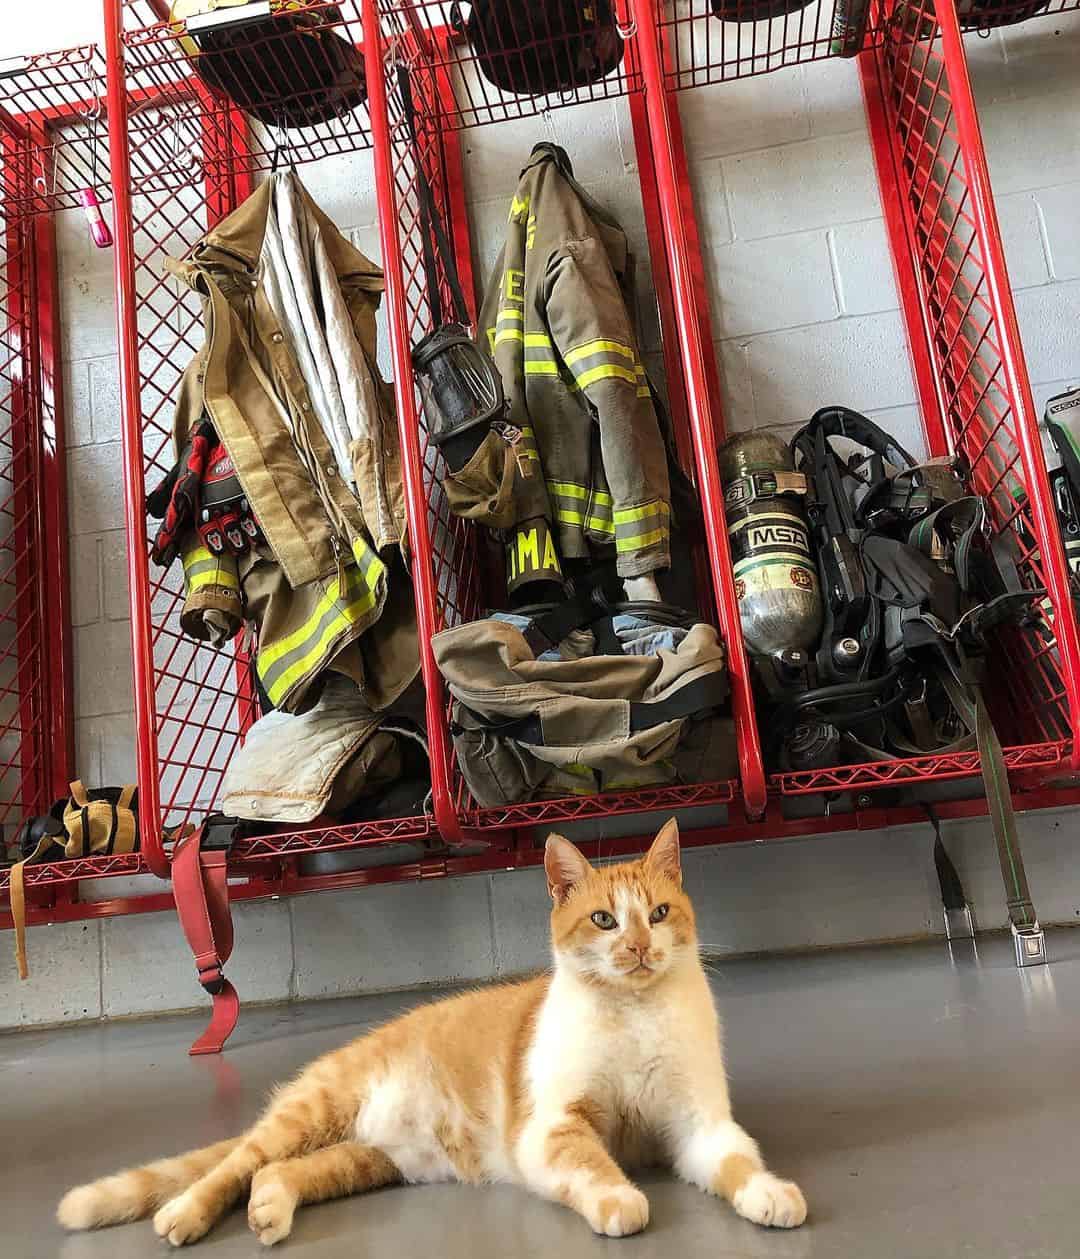 the cat is sitting on the floor under the fireman's clothes